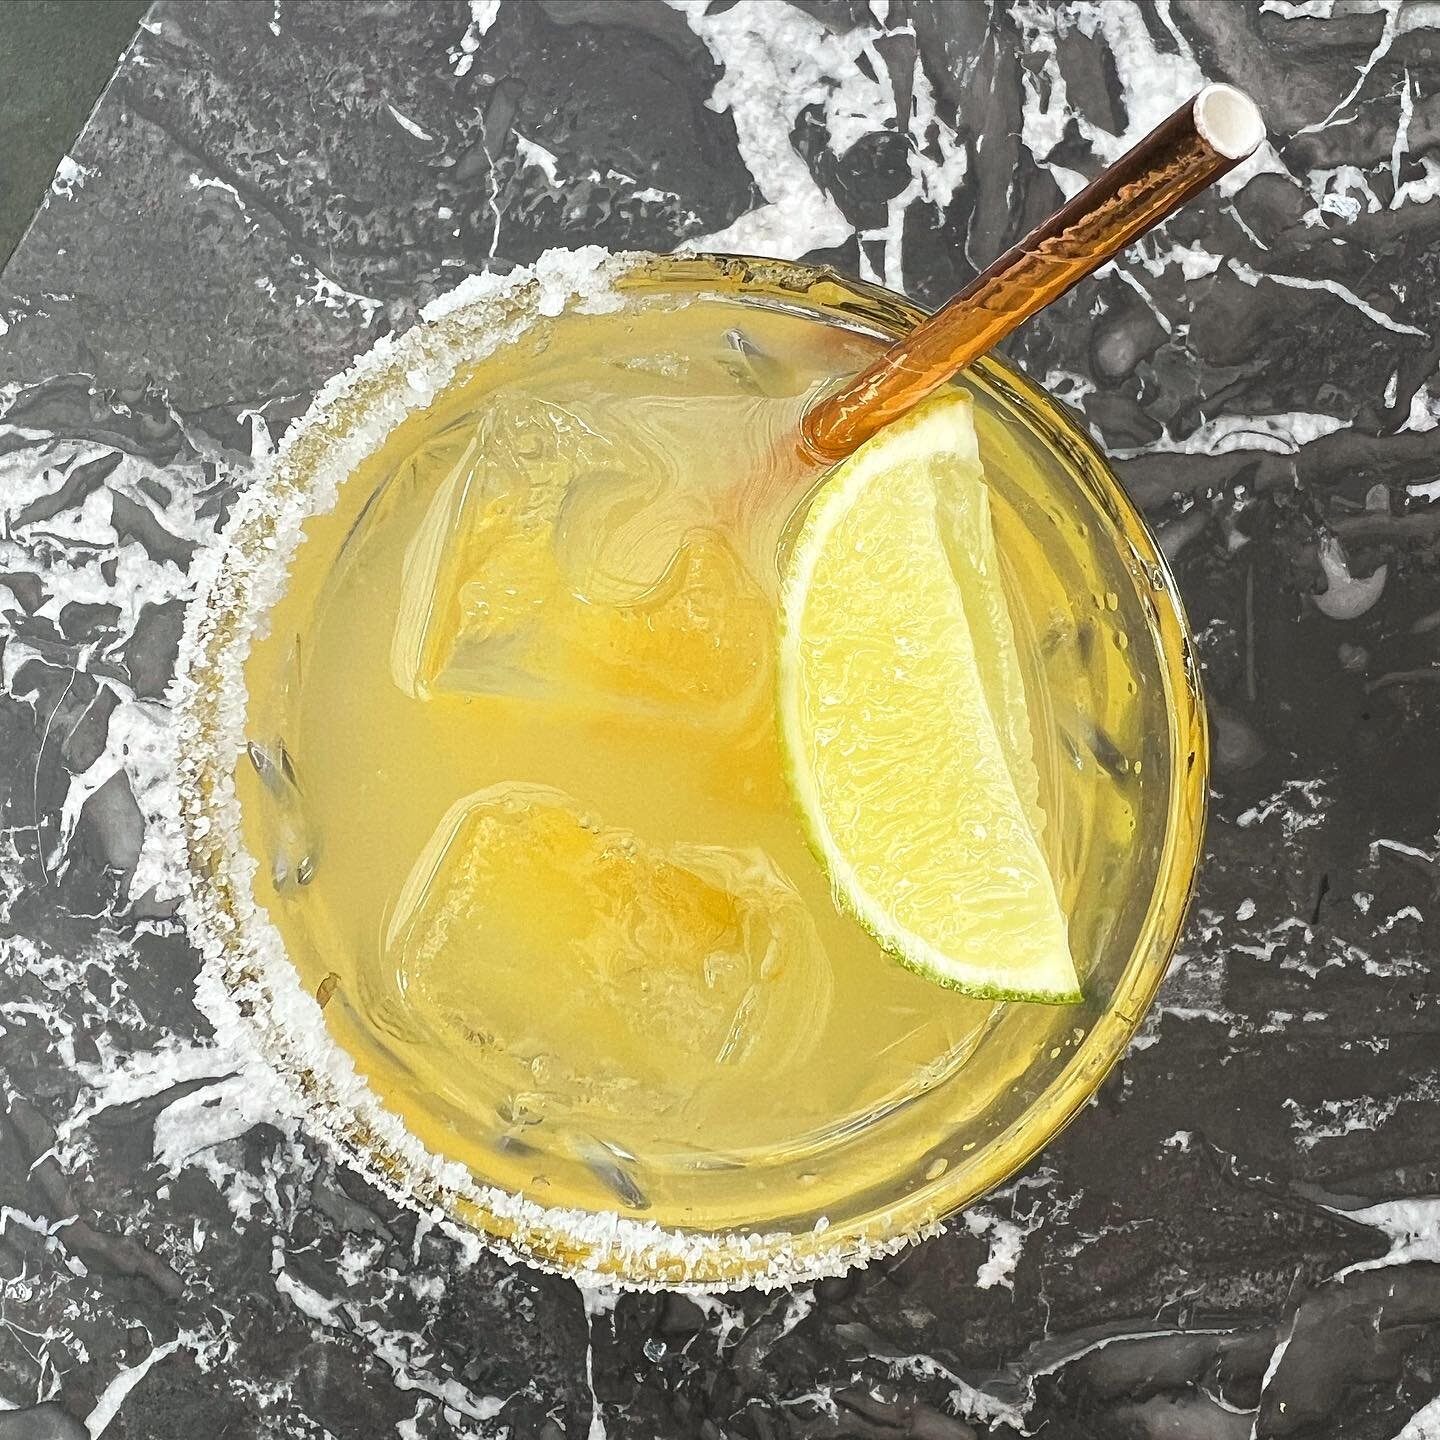 ☀️ GET READY FOR MARGARITAS TOMORROW FROM 6-9PM / 2 FOR &pound;16 / CHAMBERLAYNE SUMMER PARTY ☀️

MARGARITA MENU 🥳 

- Tommy&rsquo;s 
- Spicy 
- French 
- Paloma 

See you tomorrow! 🥳 

#kensalrise #thechamberlayne #queenspark #summerparty #margari